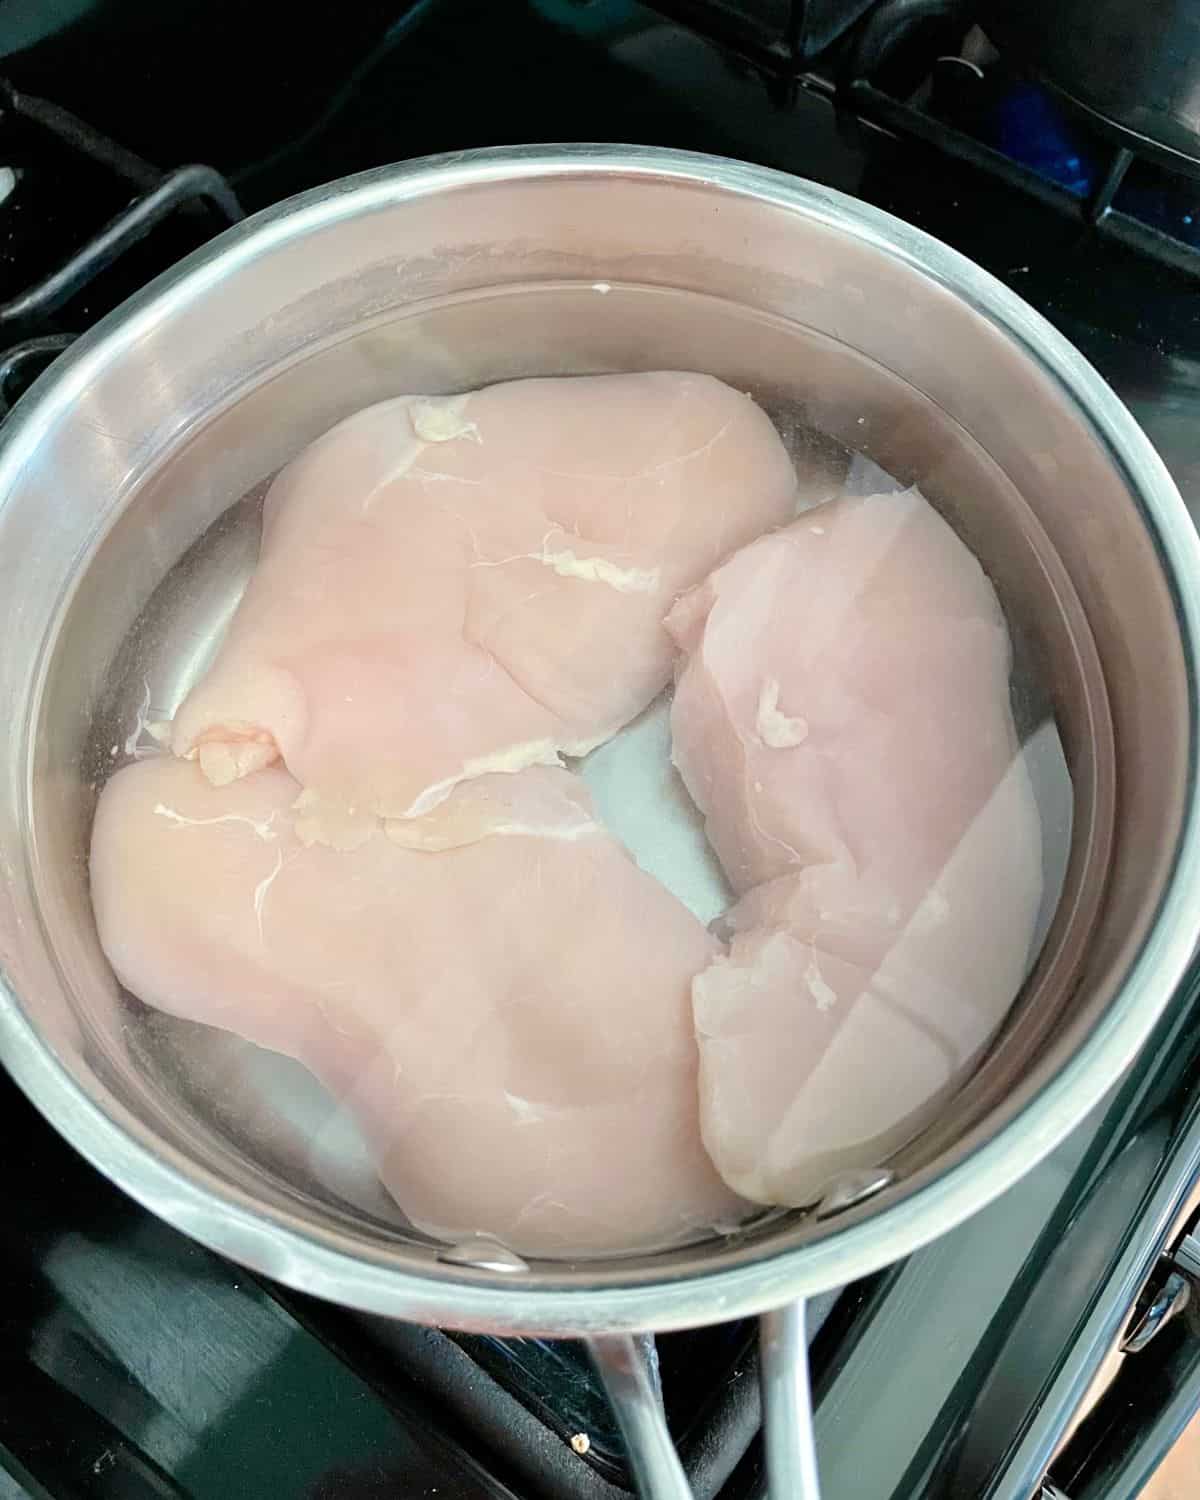 Raw chicken in water in a saucepan.